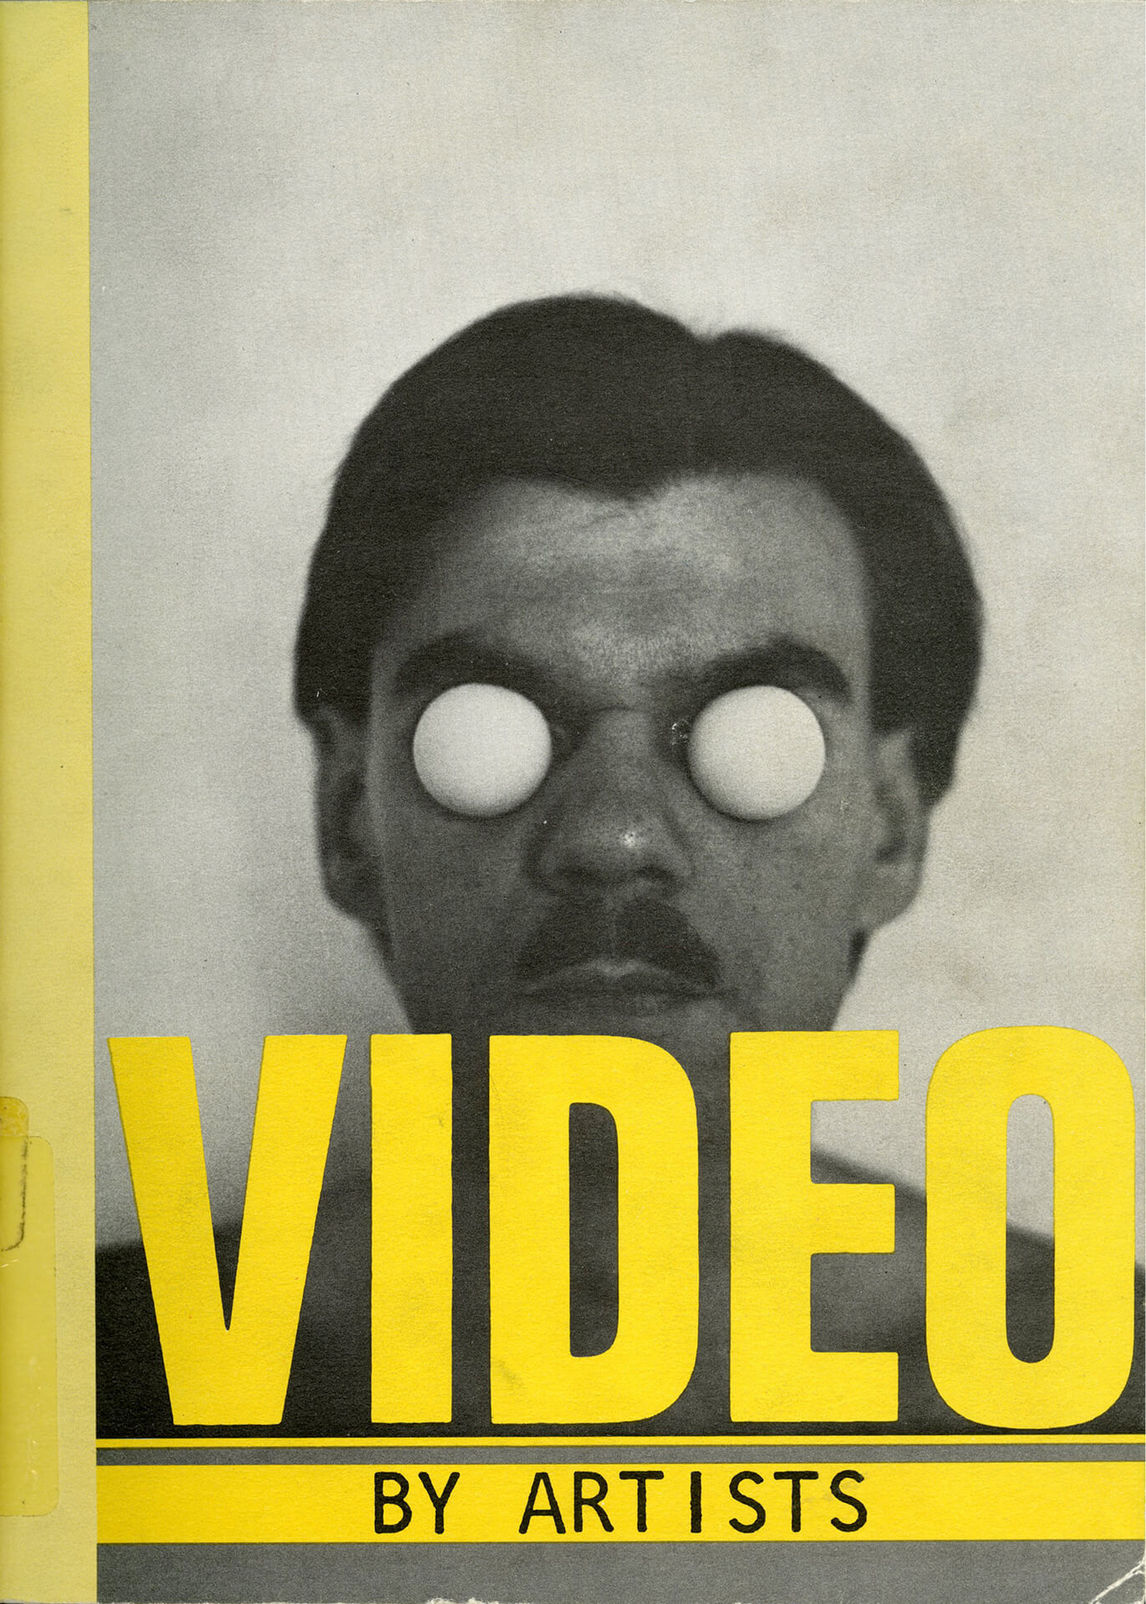 Art Canada Institute, General Idea, Peggy Gale, Video by Artists, 1976